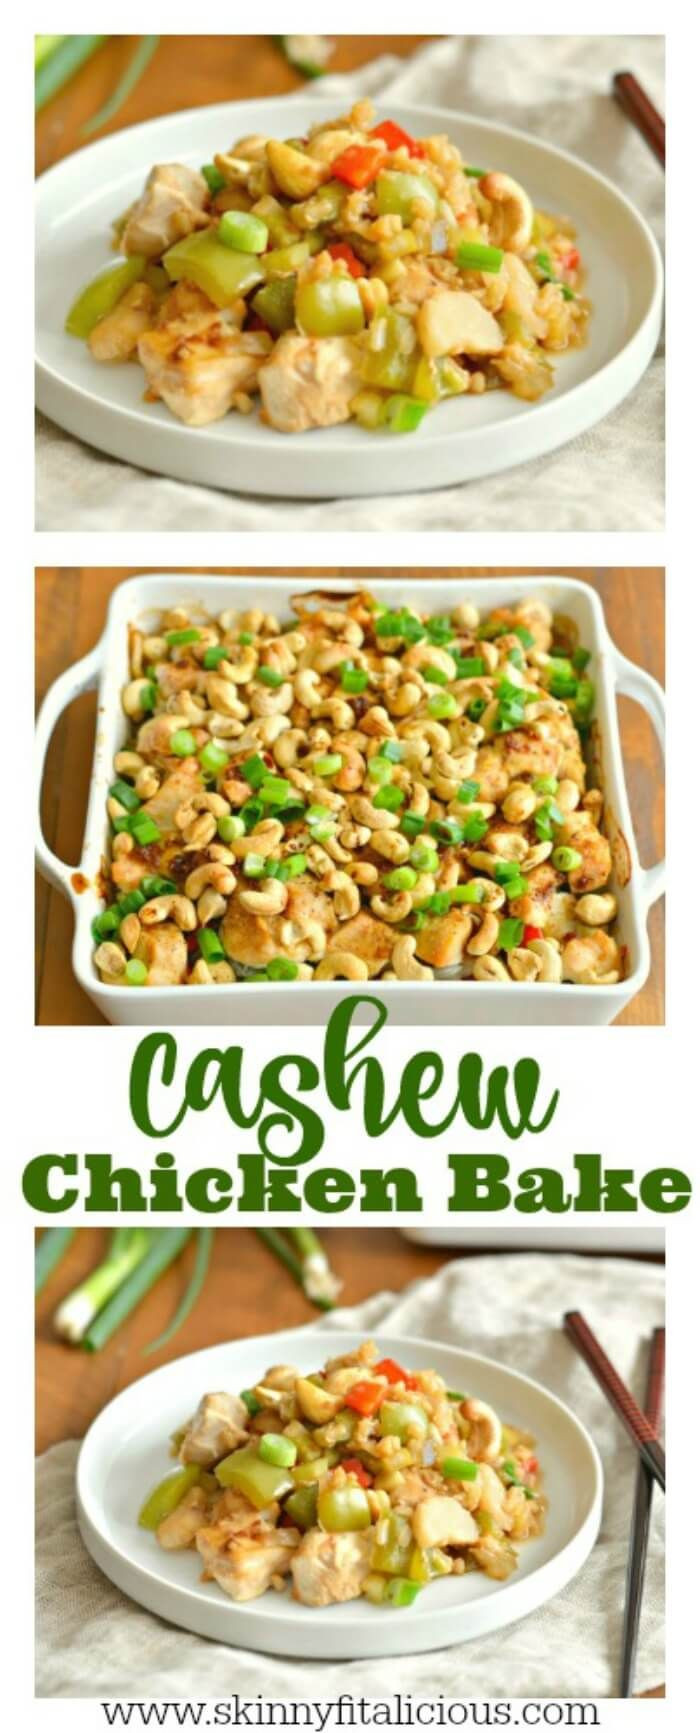 Low Calorie Vegetable Side Dishes
 100 Low Calorie Recipes on Pinterest